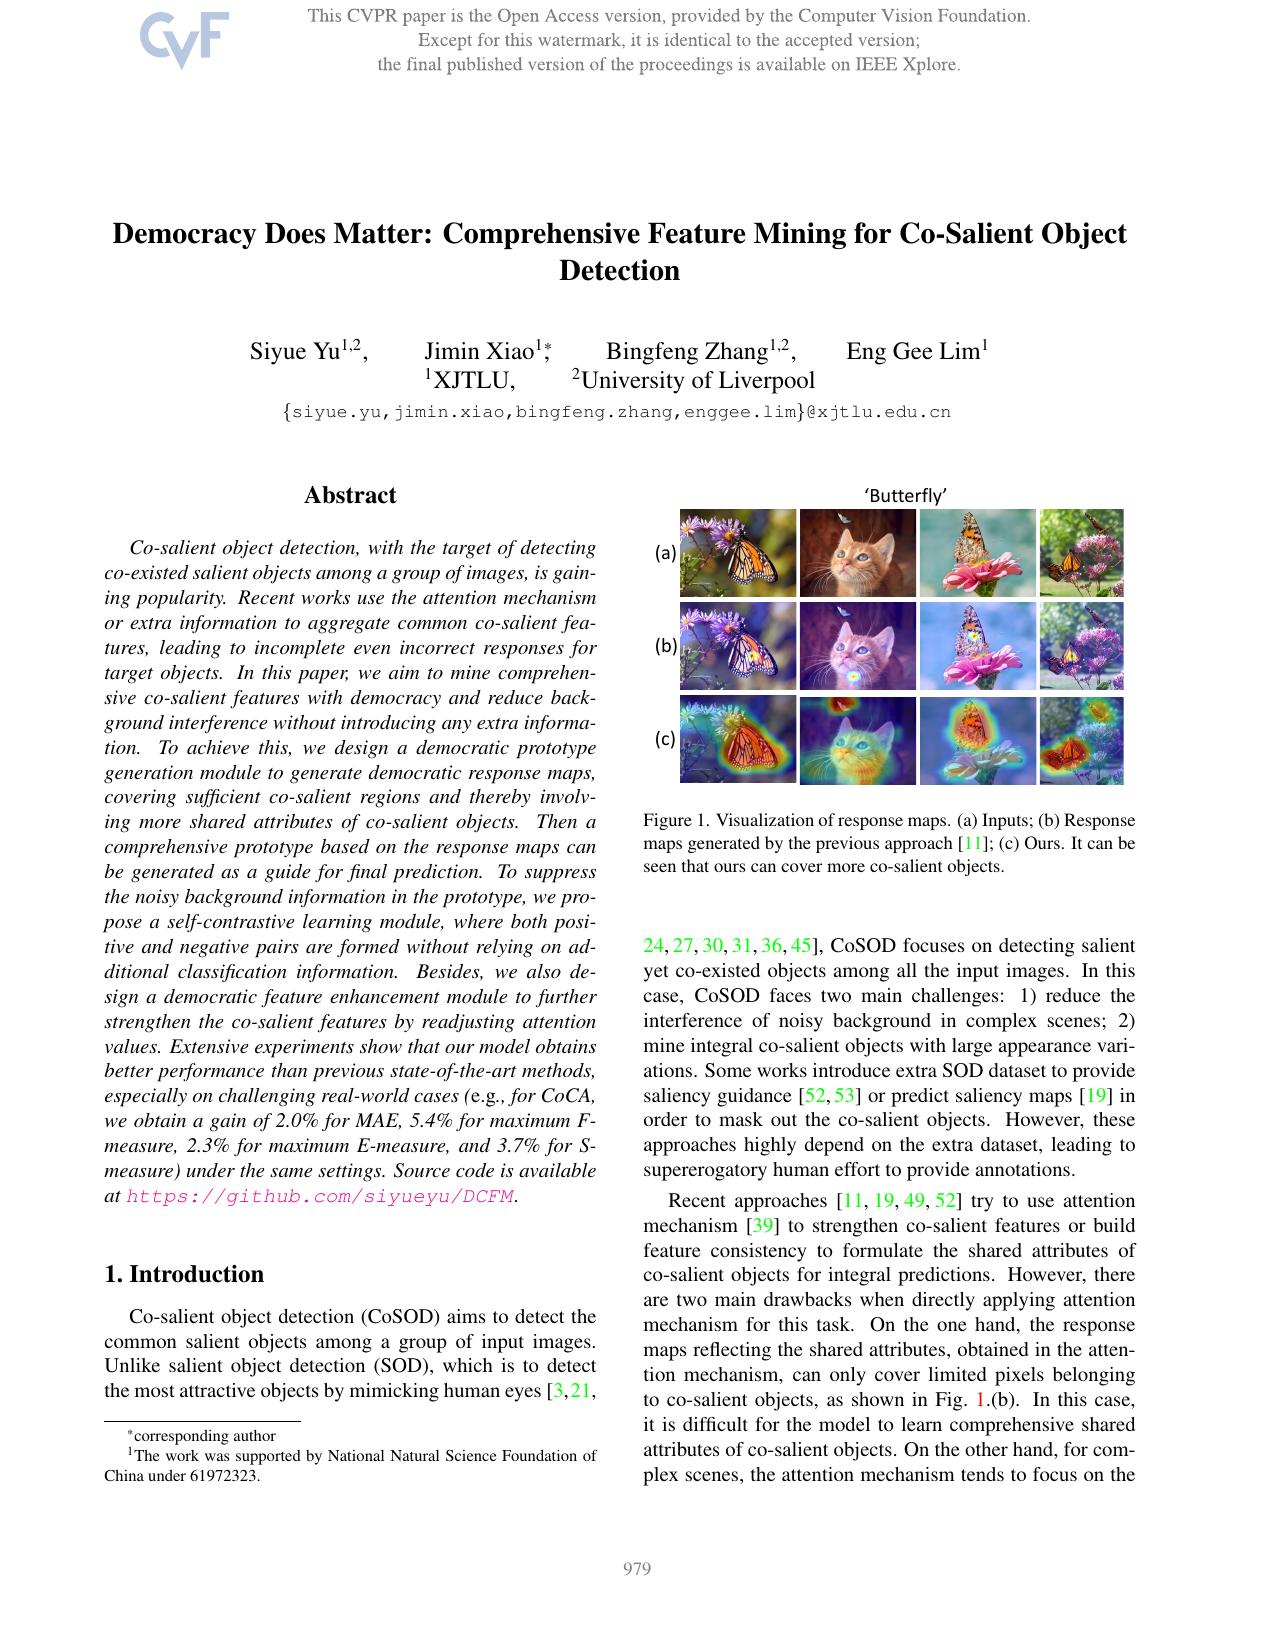 Democracy Does Matter: Comprehensive Feature Mining for Co-Salient Object Detection by Siyue Yu & Jimin Xiao & Bingfeng Zhang & Eng Gee Lim